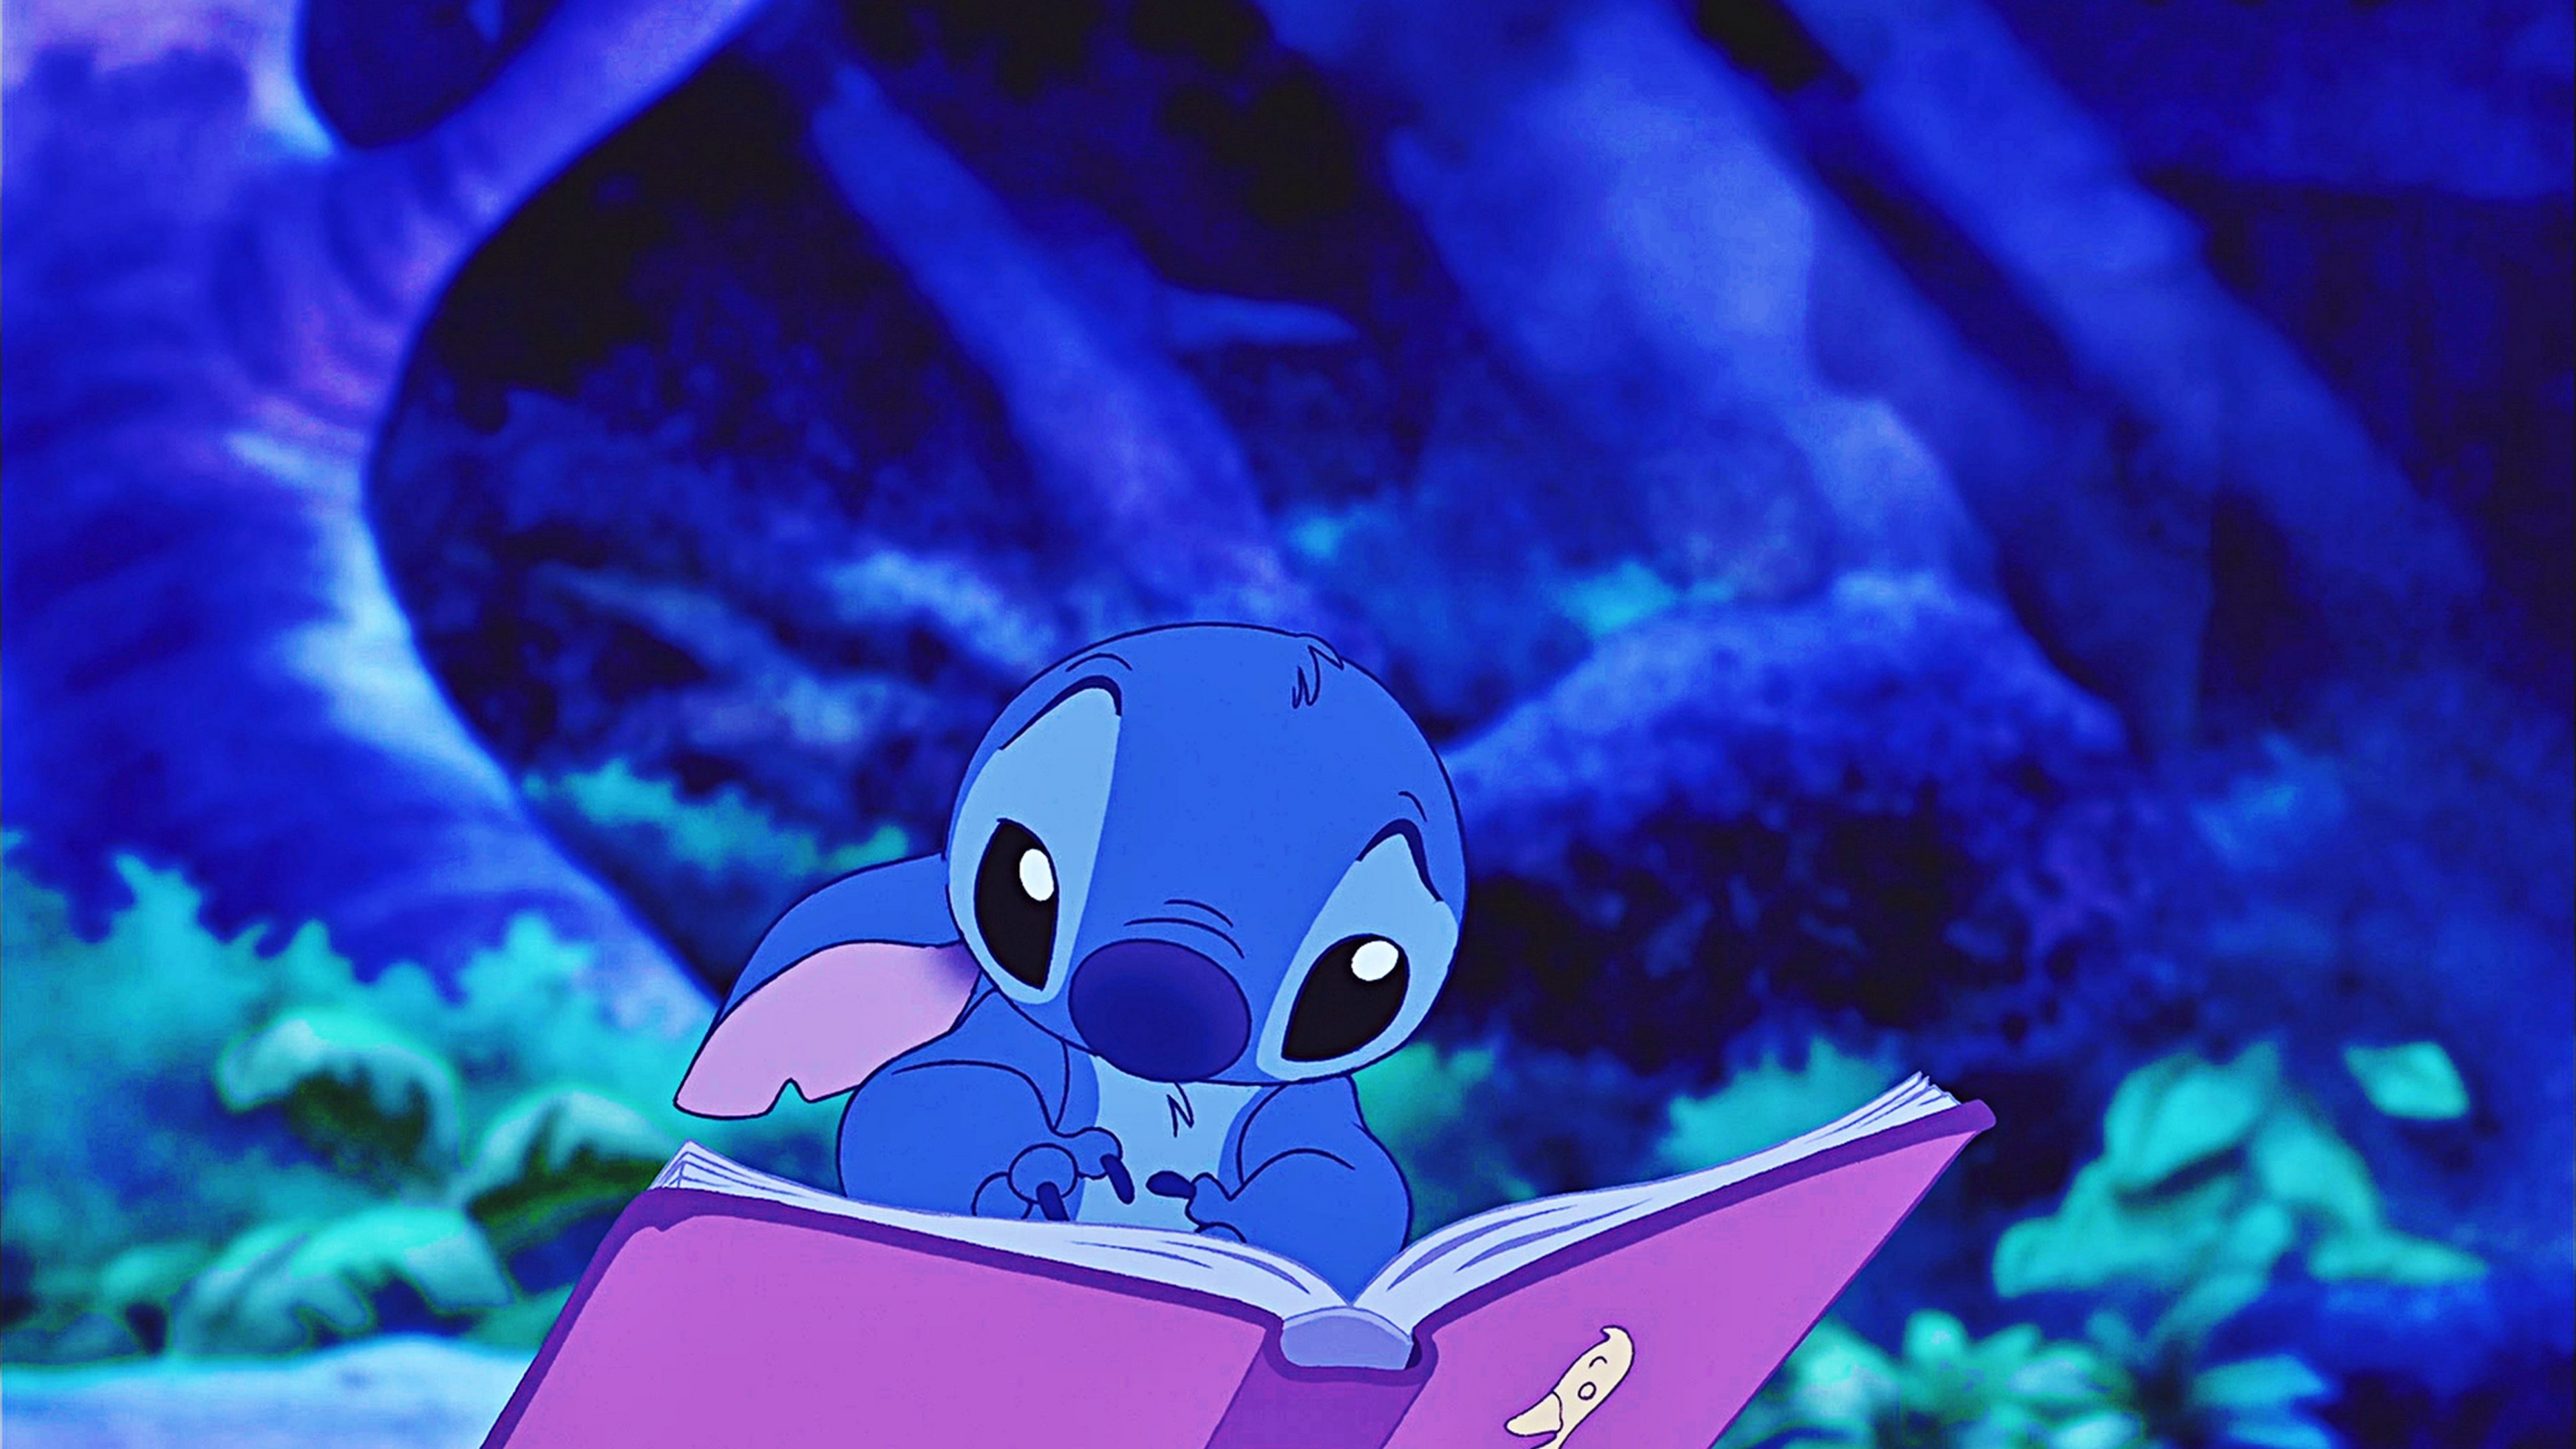 Stitch reading The Ugly Duckling Wallpaper ID:2888